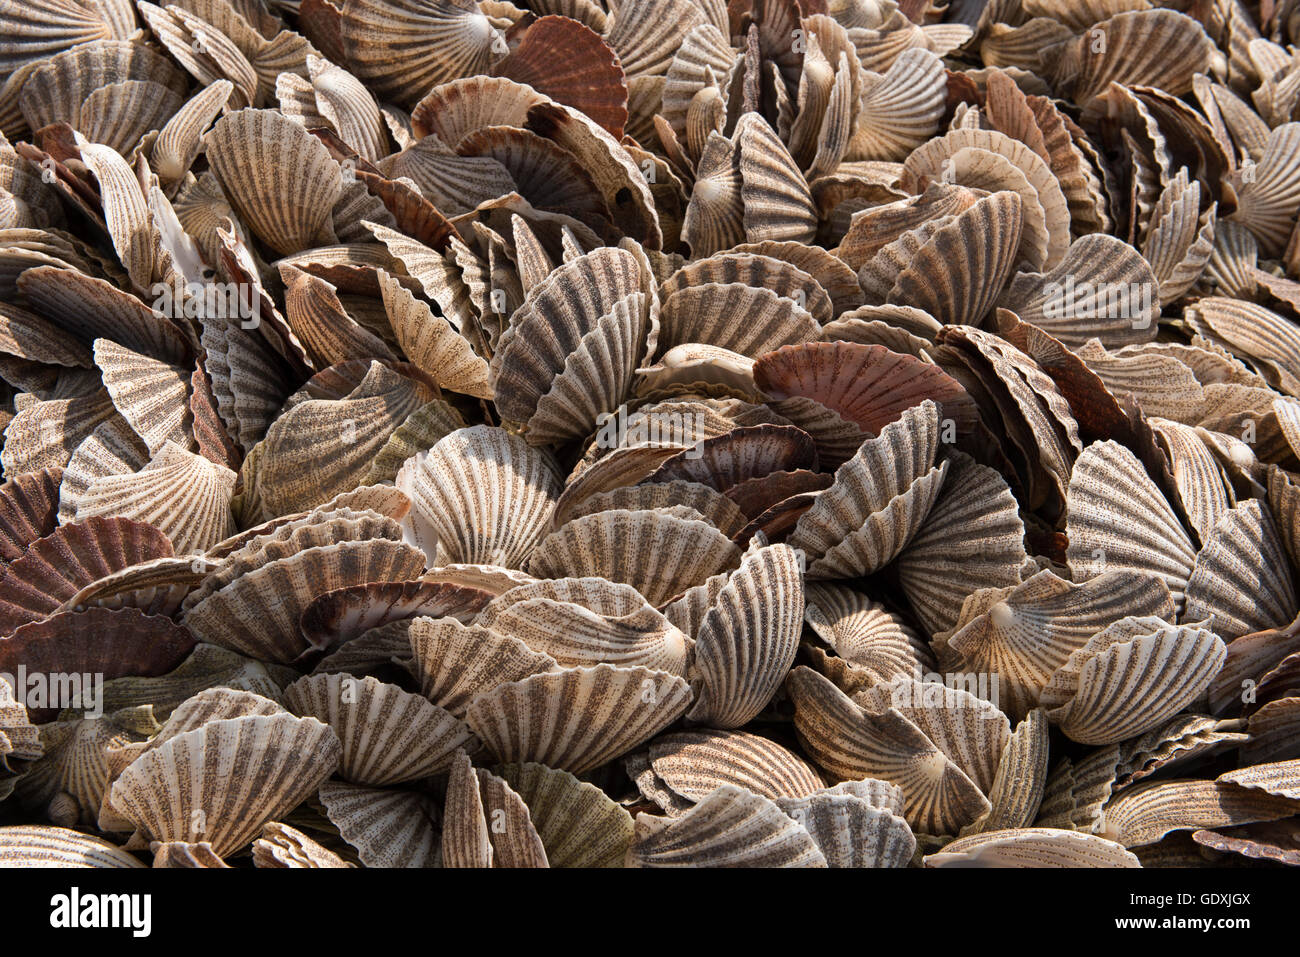 Discarded scallop shells Stock Photo